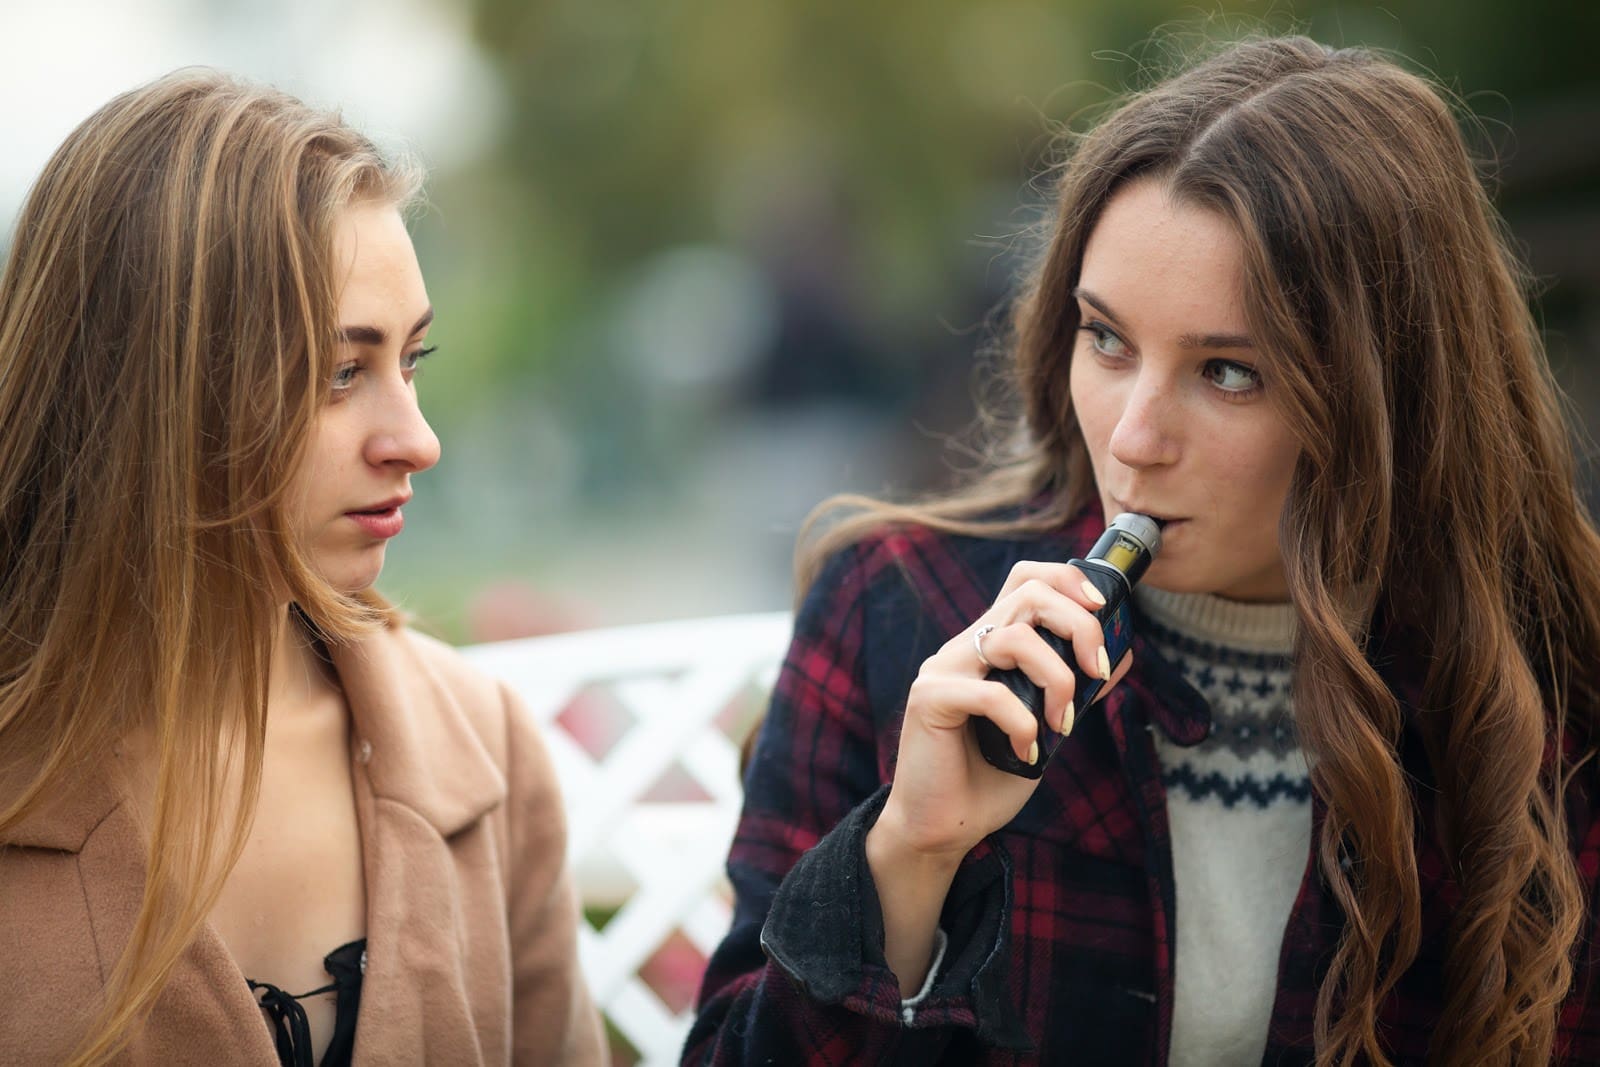 How Vaping Nicotine and THC May Increase Depression, Anxiety in Teens